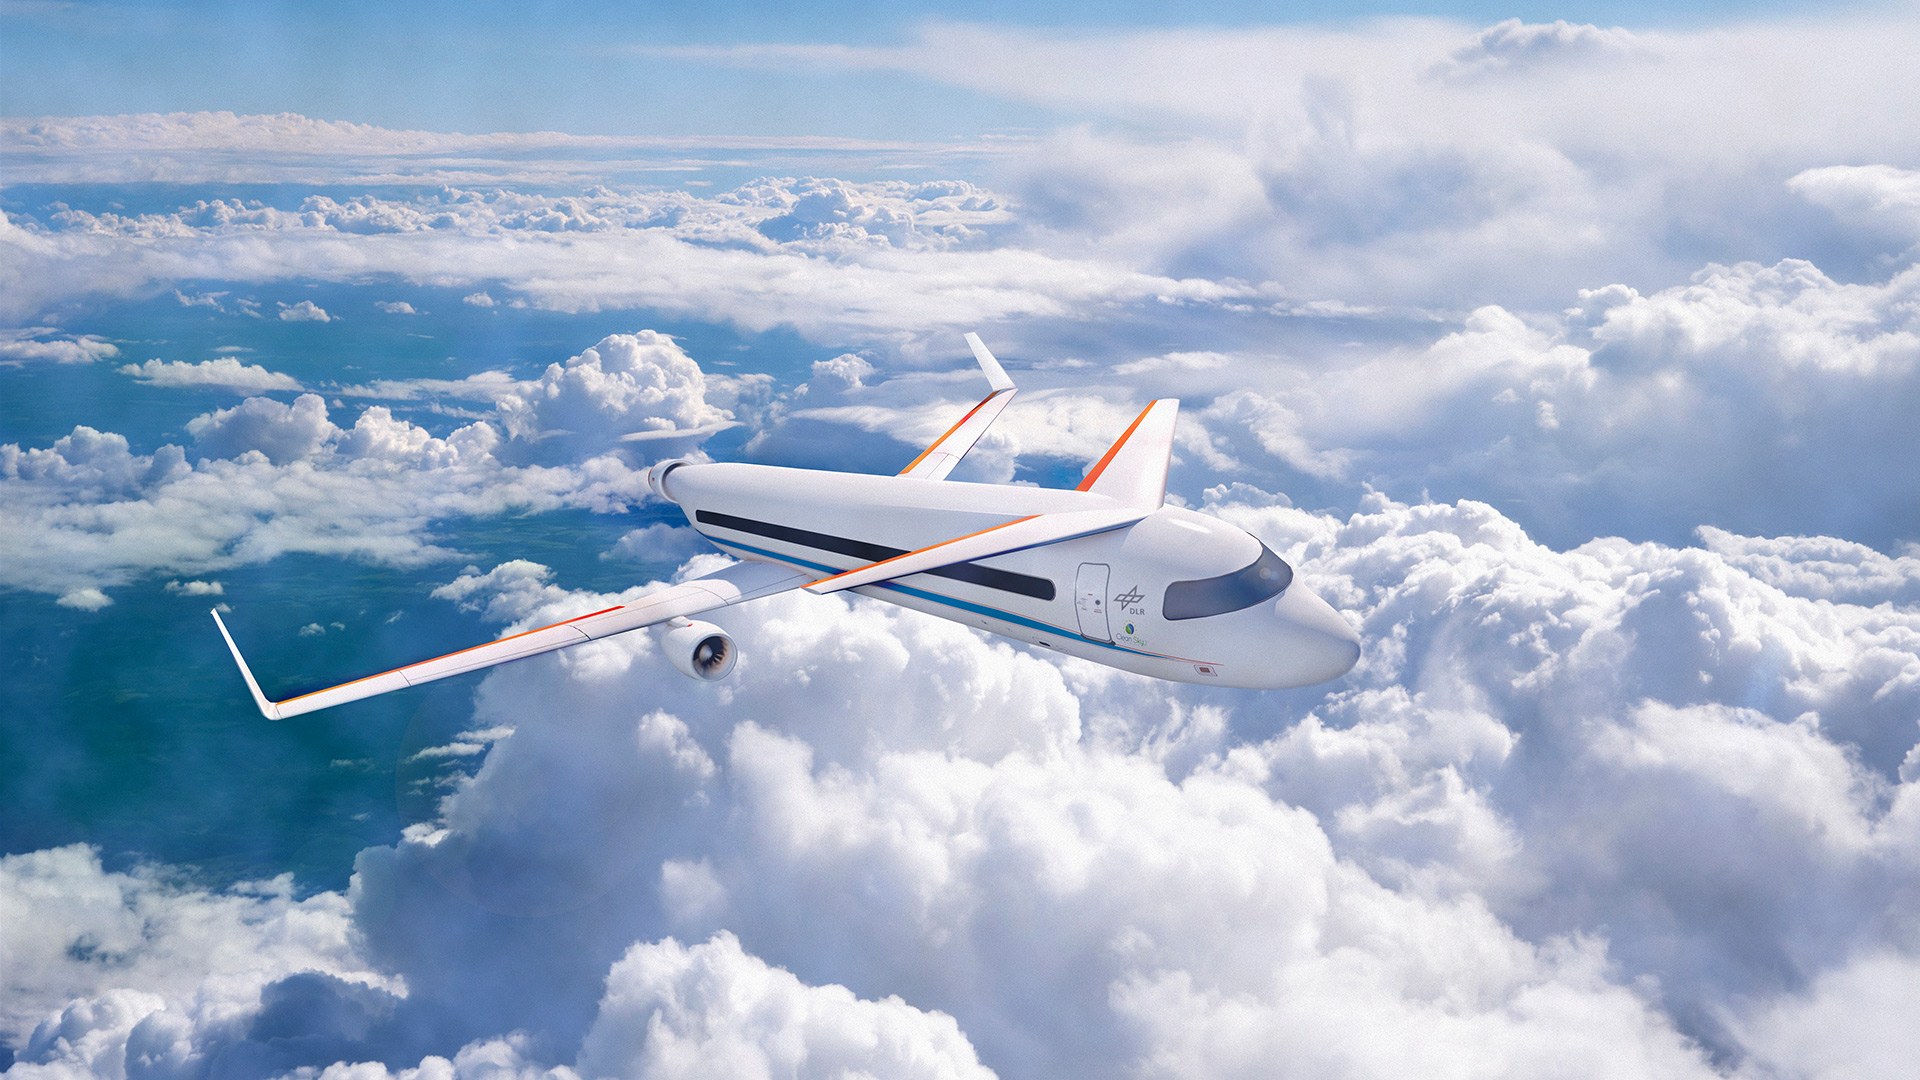 Electric propulsion systems enable innovative aircraft designs